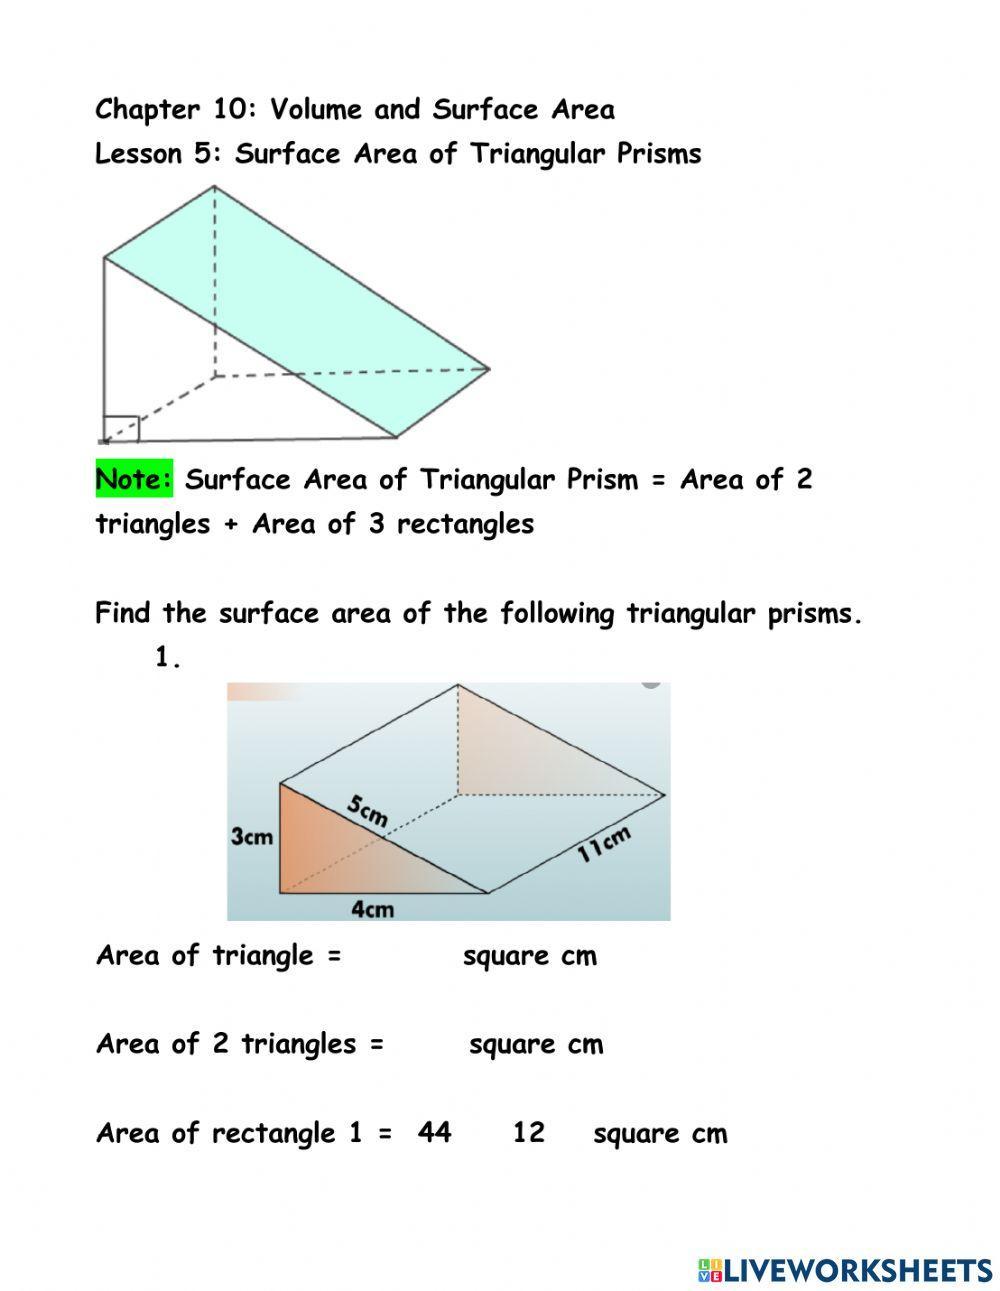 Ch 10 Ln 5 Surface Area of Triangular Prisms